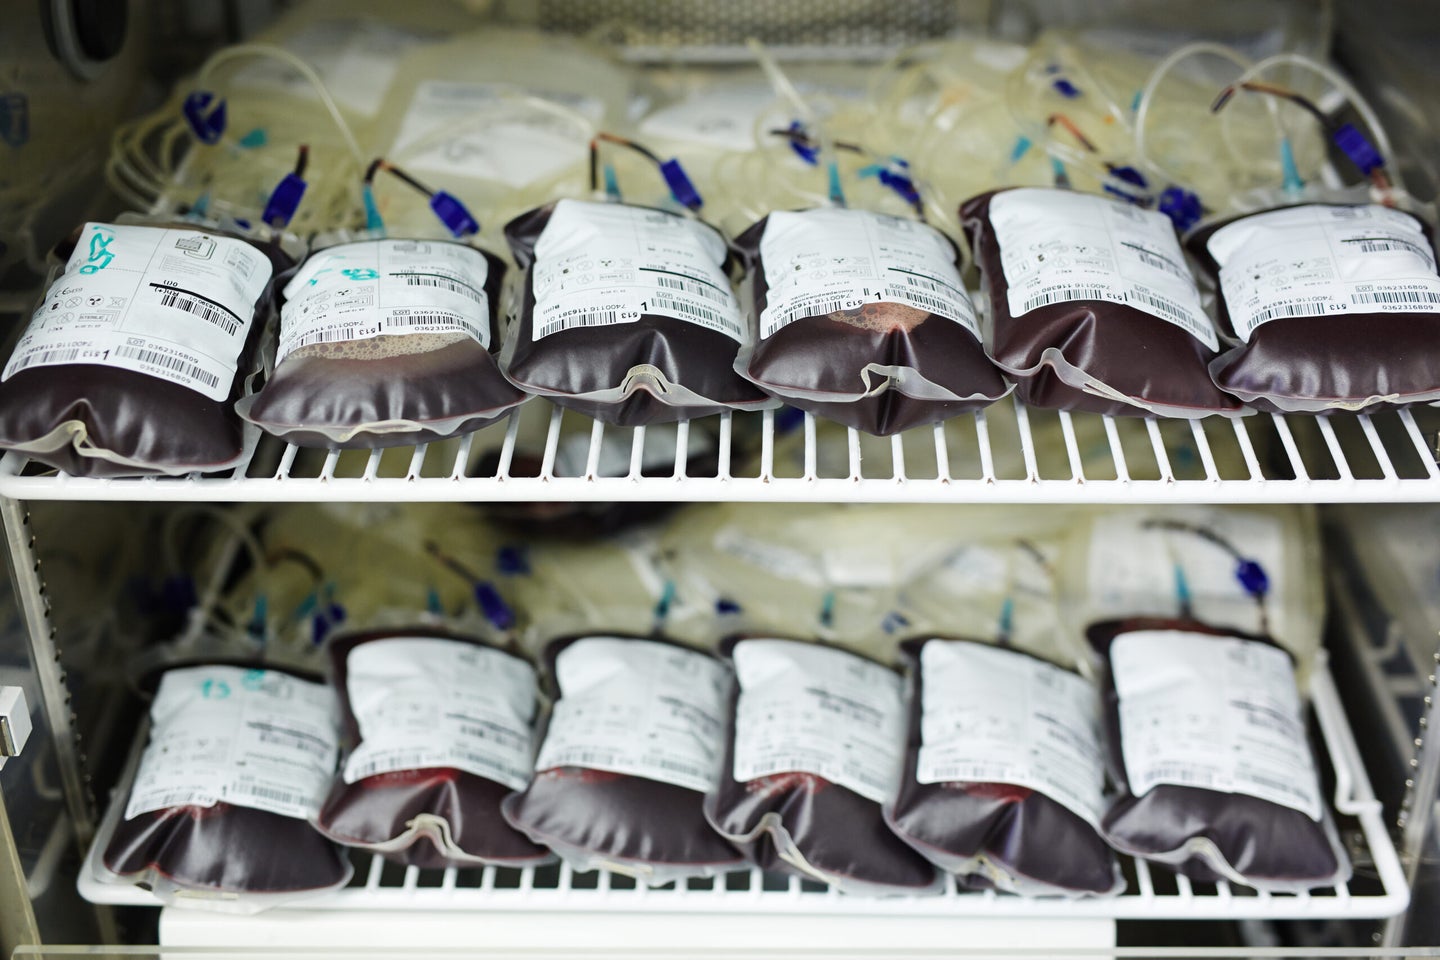 Please don’t pay $8,000 for an infusion of young blood